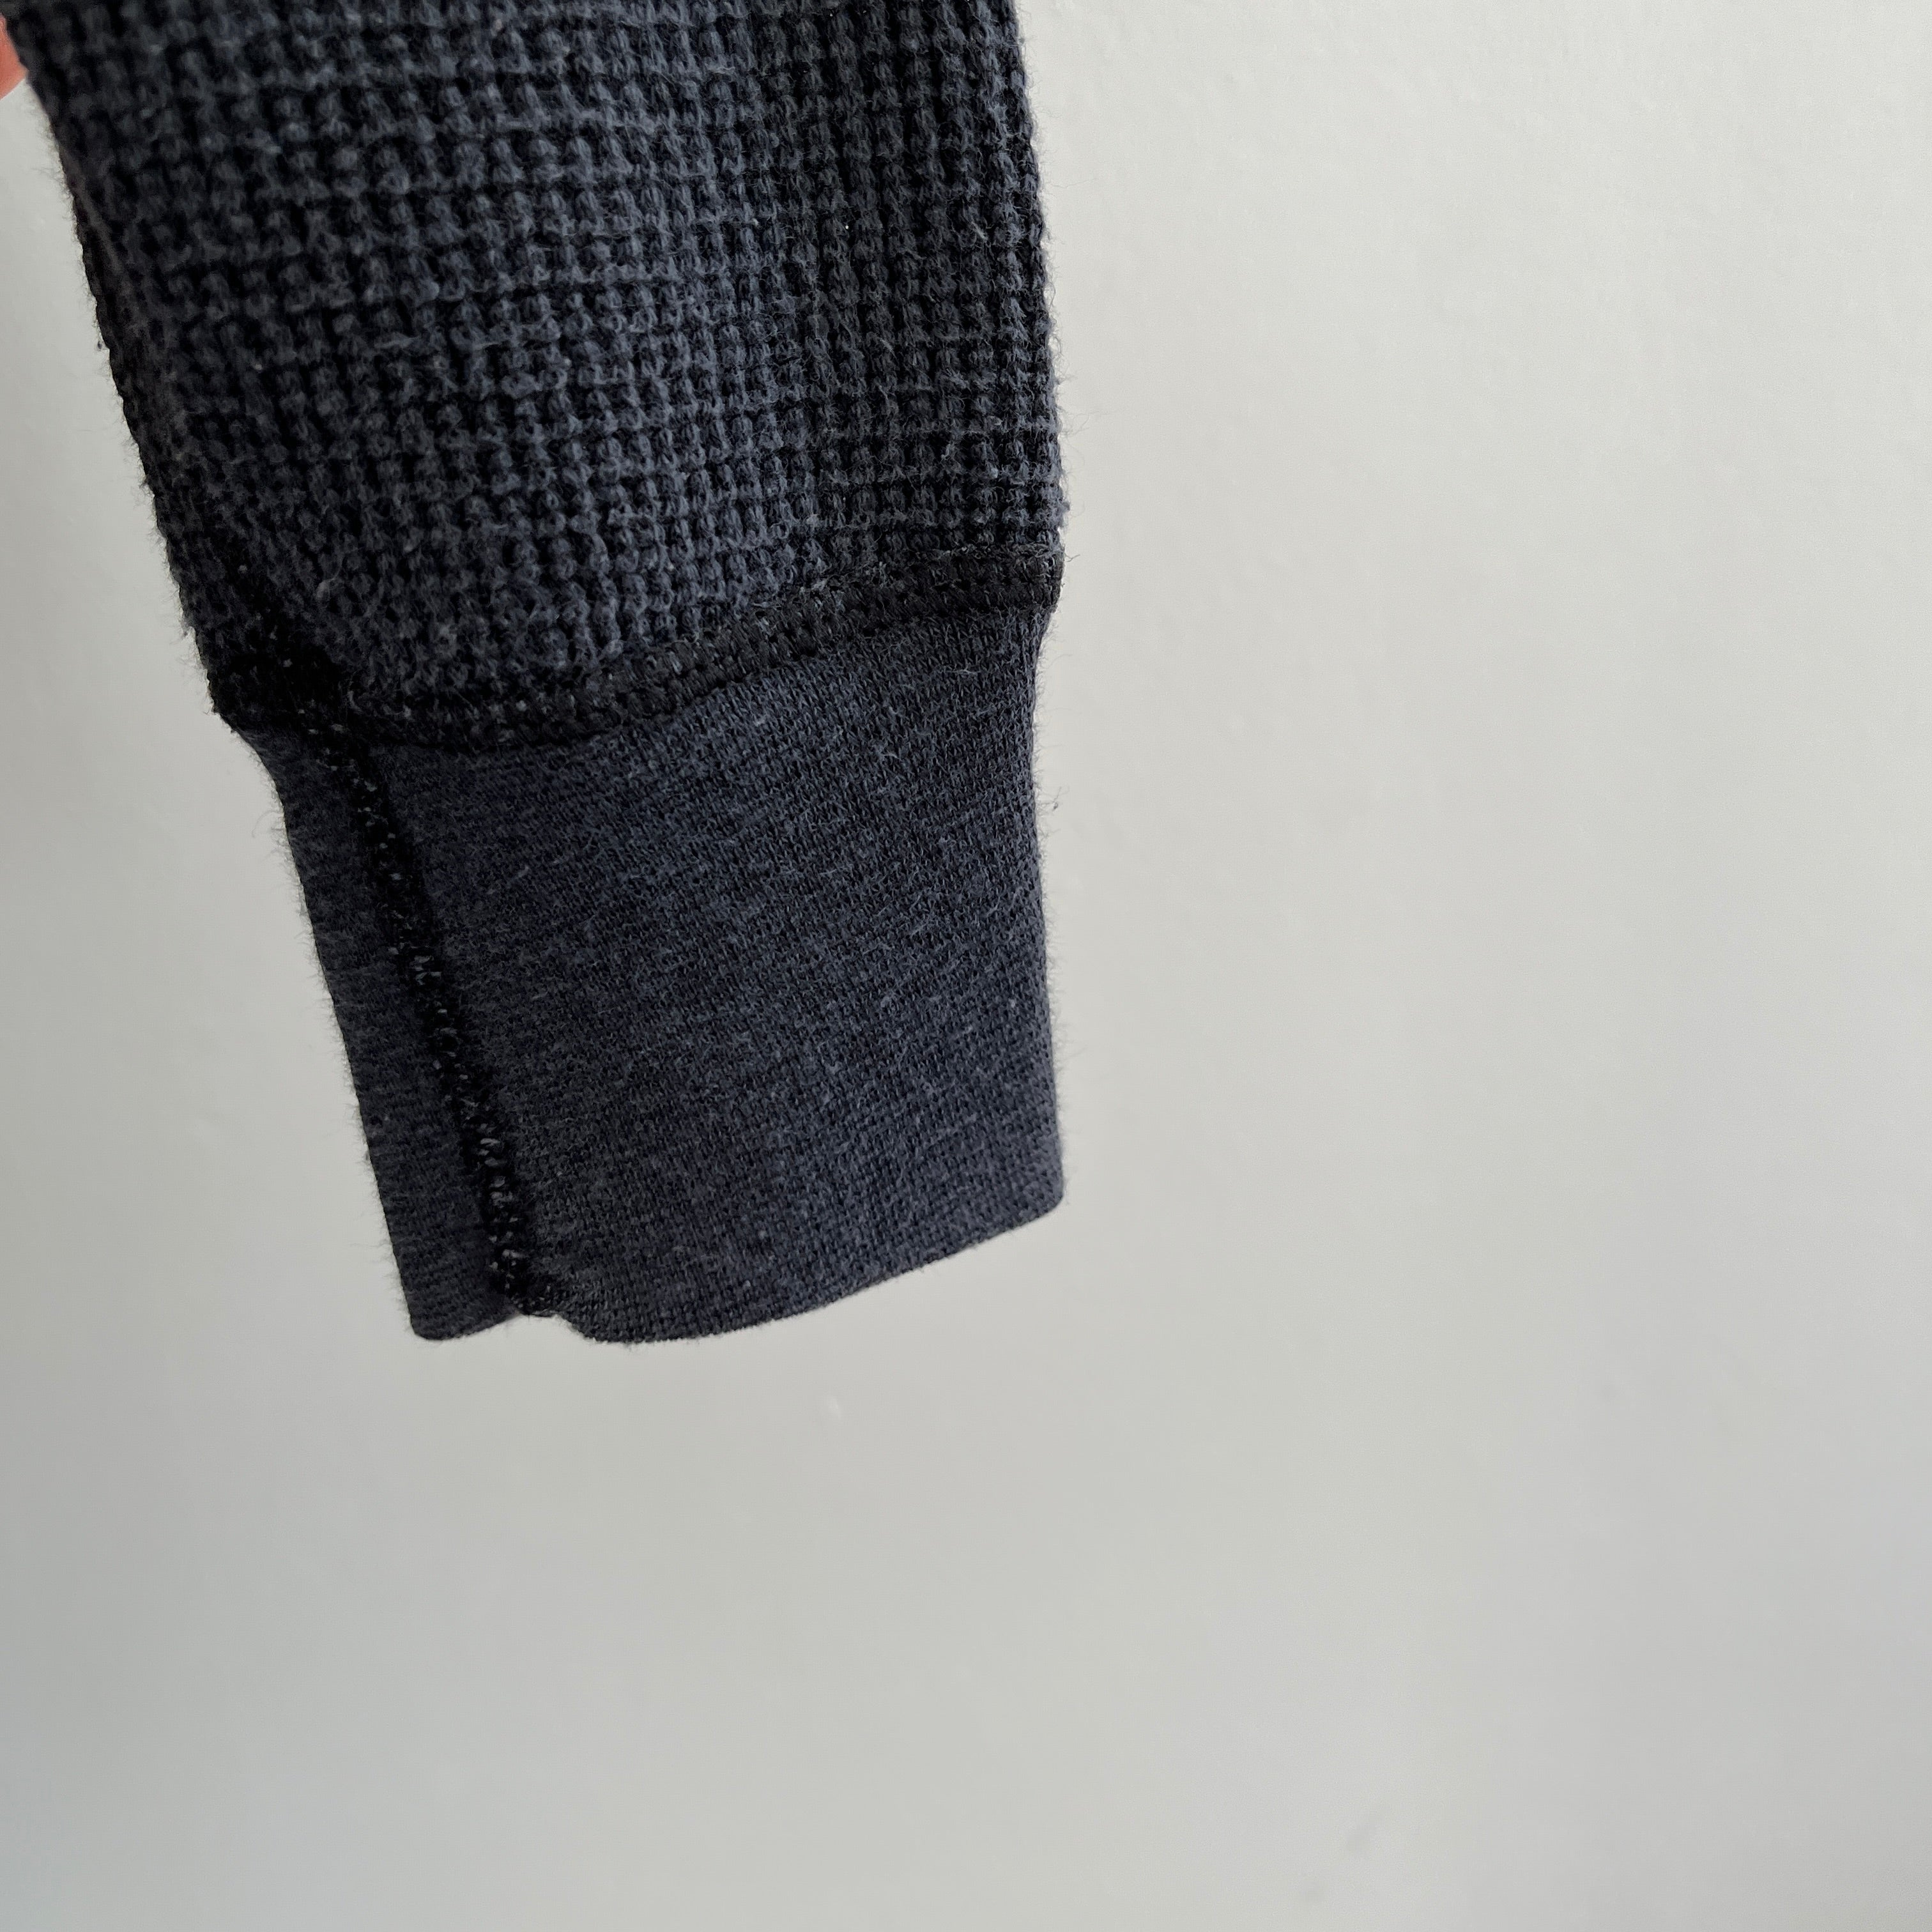 1970/80s Faded Black/Gray Long Johns Brand Thermal